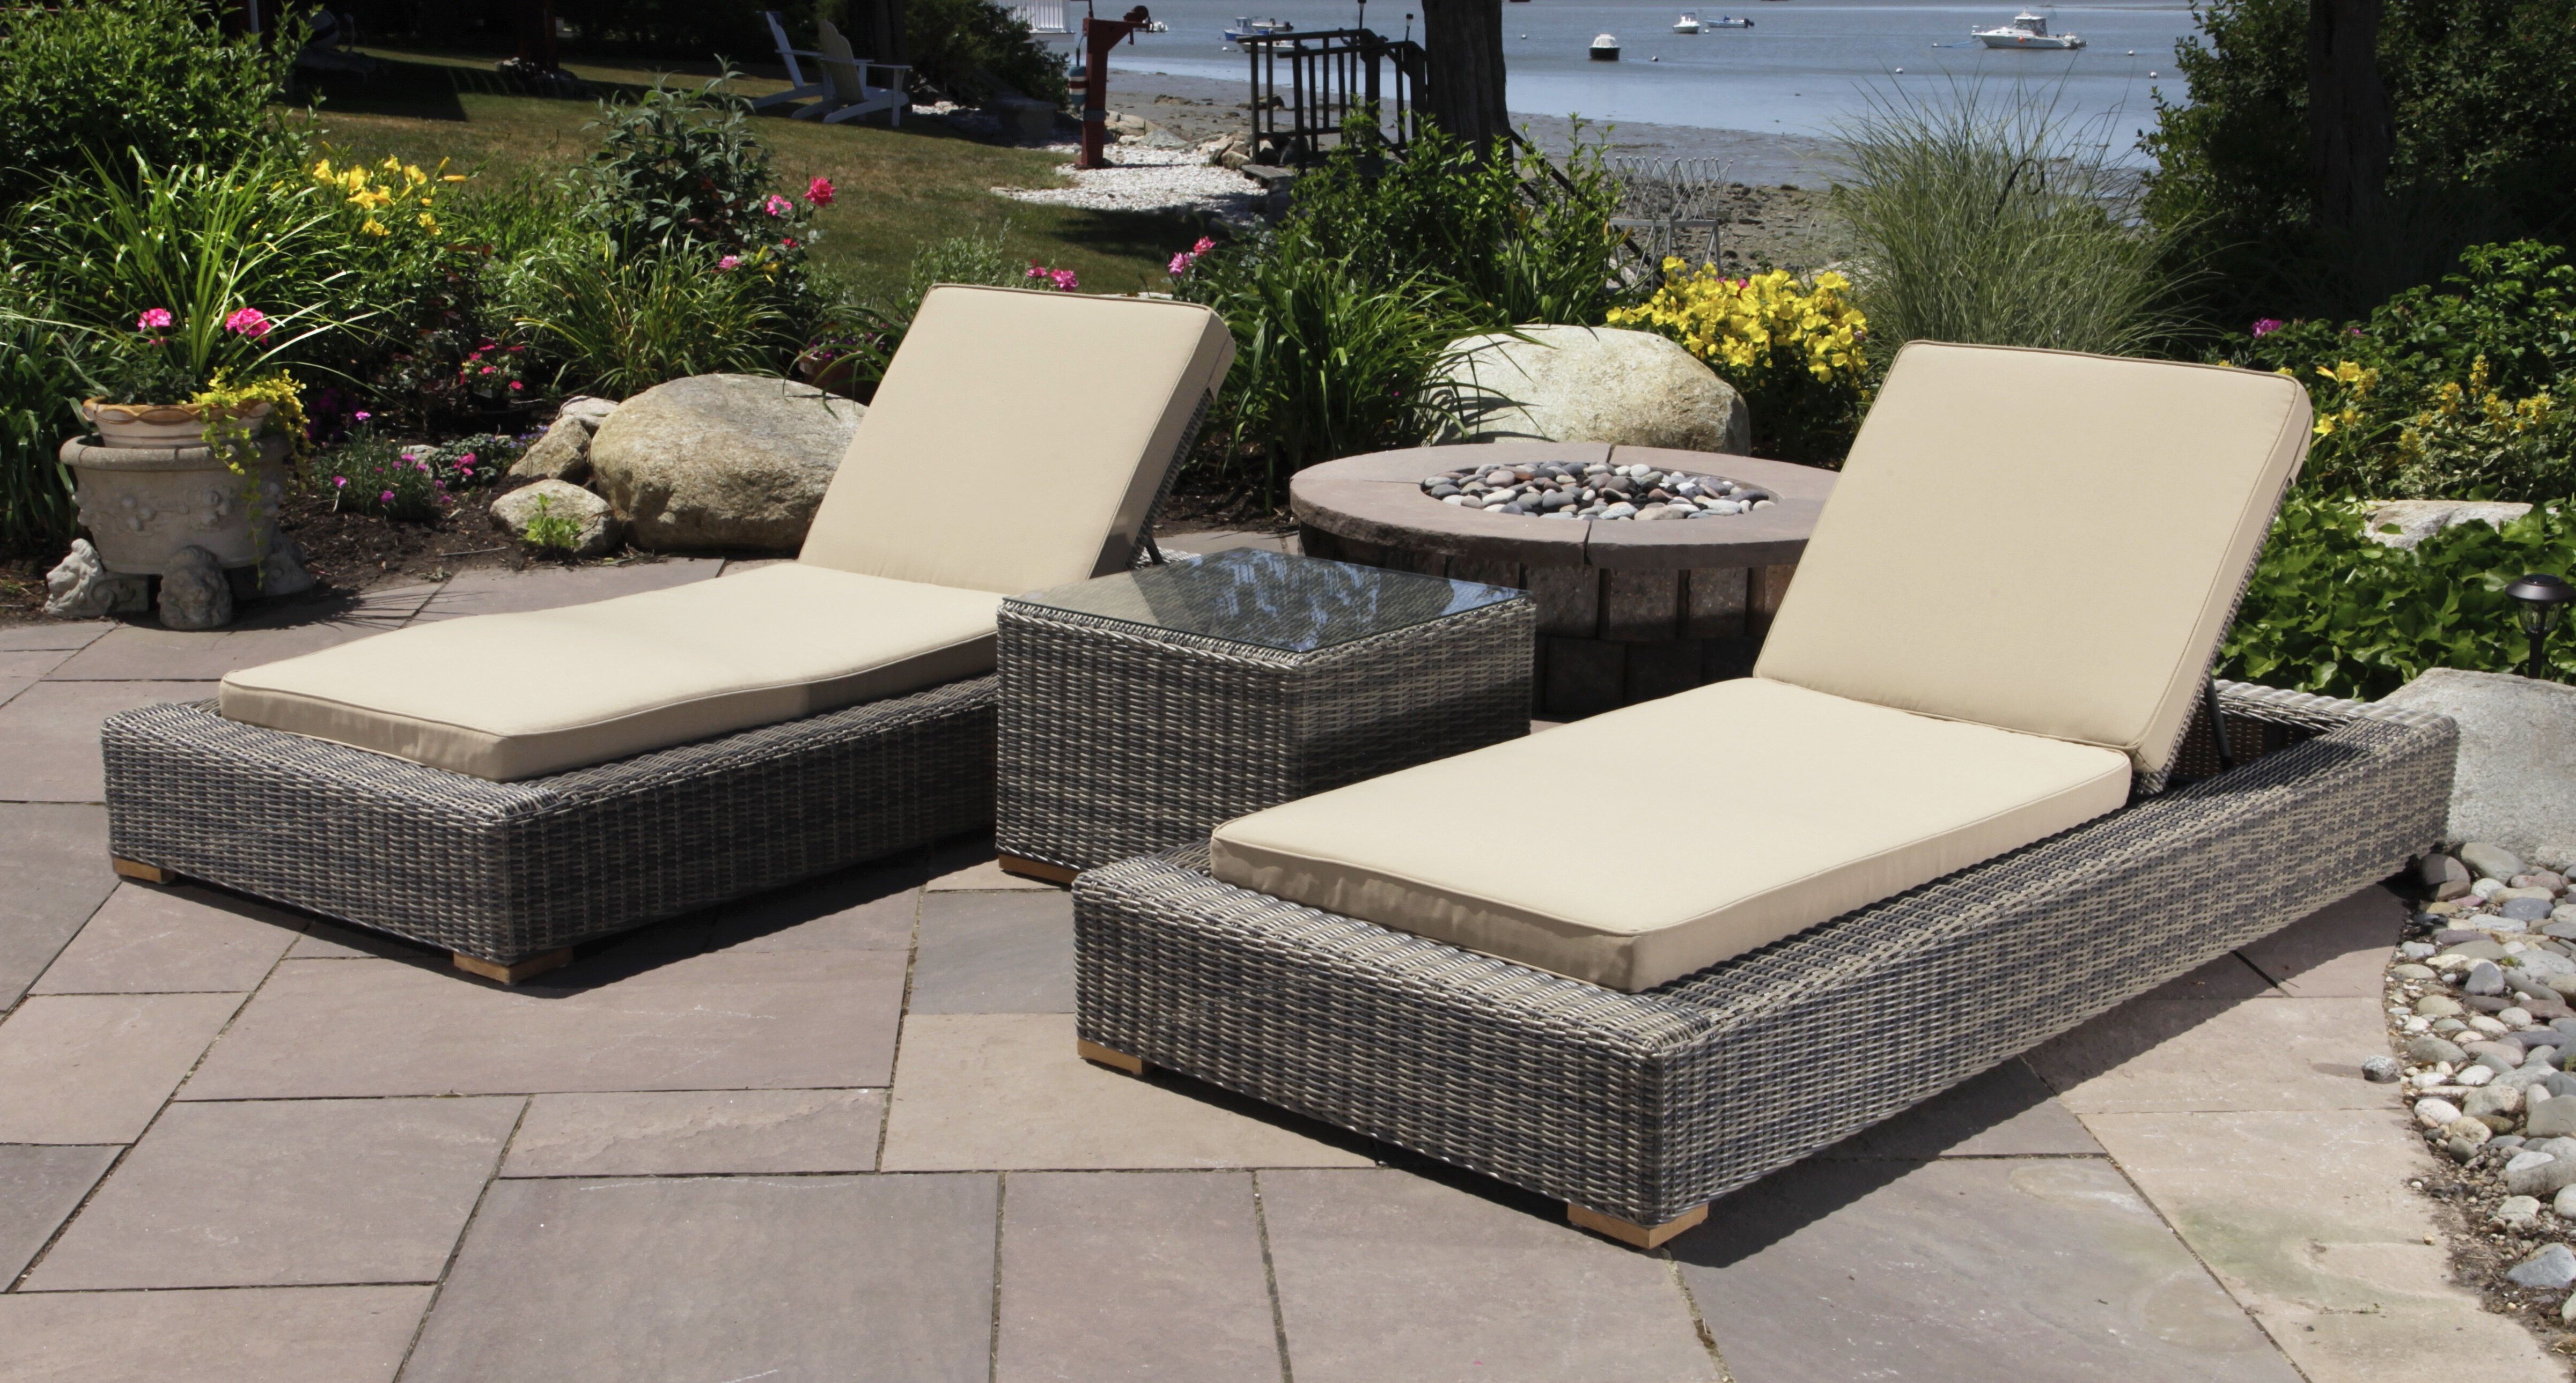 Outdoor 3 Piece Chaise Lounger Sets With Table In Preferred Corsica 3 Piece Chaise Lounge Set With Cushions And Table (View 3 of 25)